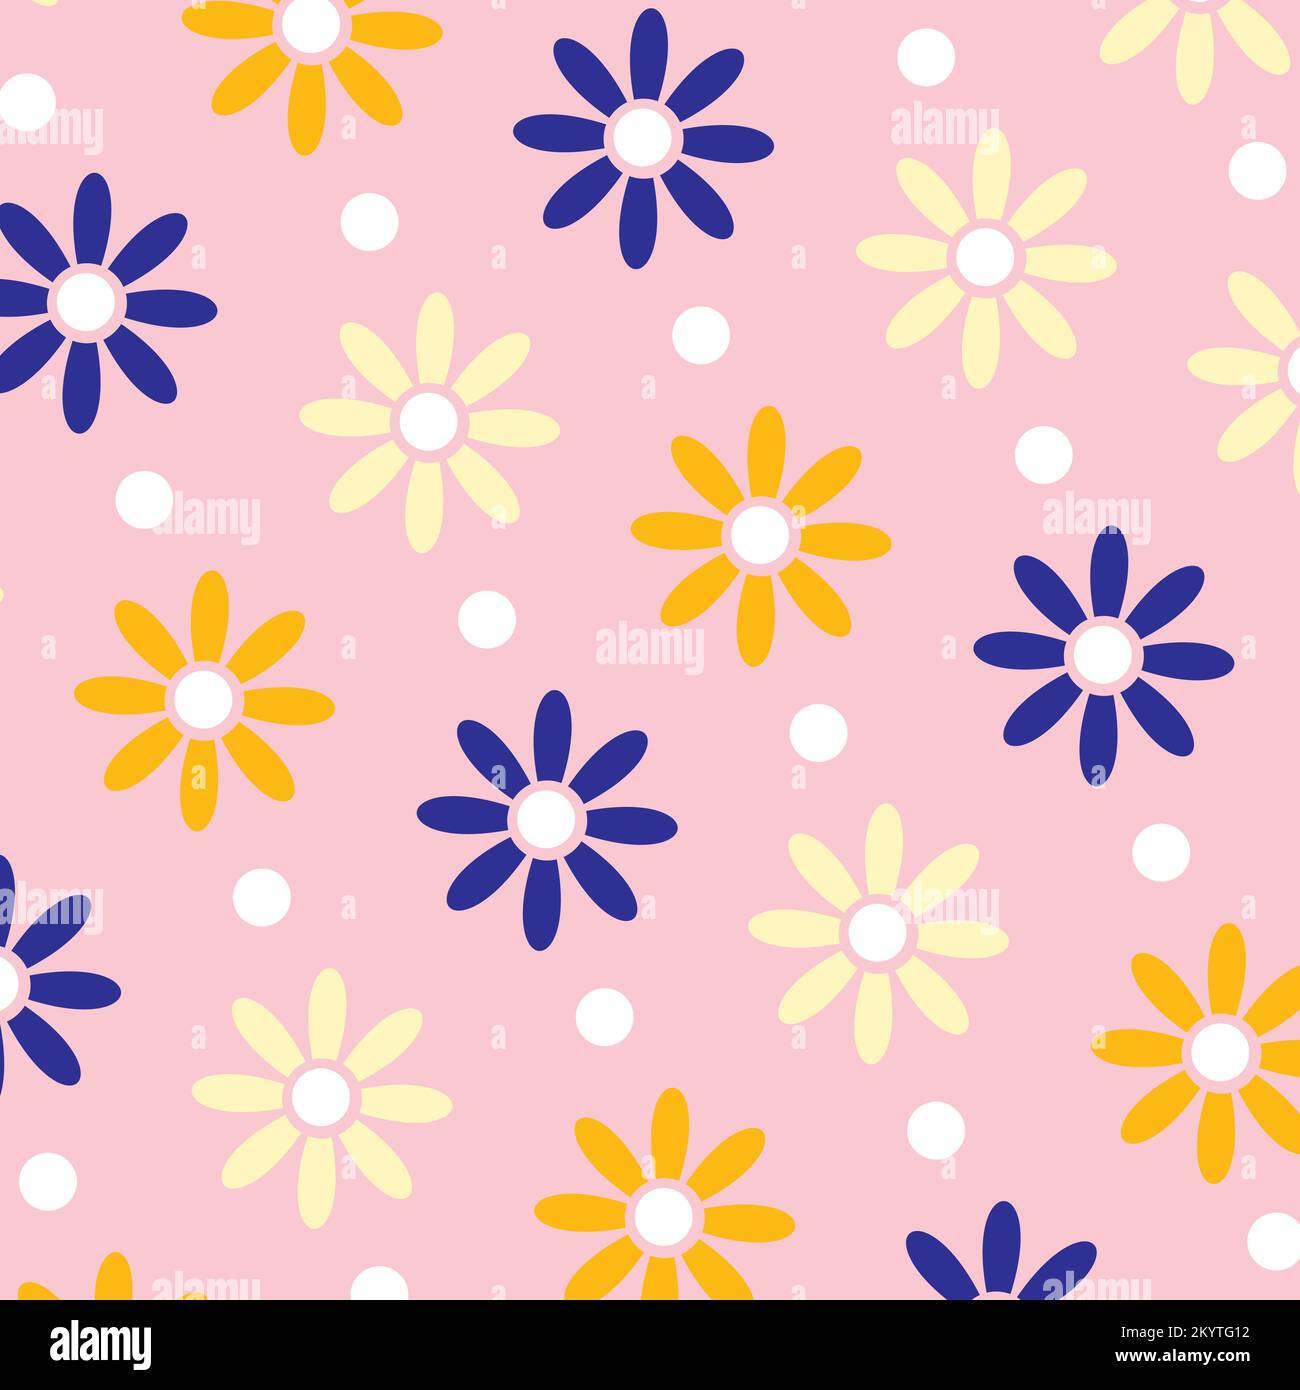 Daisy Chamomile Flower Pattern On Pink Background. Cute Floral Pattern For fashion Print, Textile, Wrap Paper Stock Vector